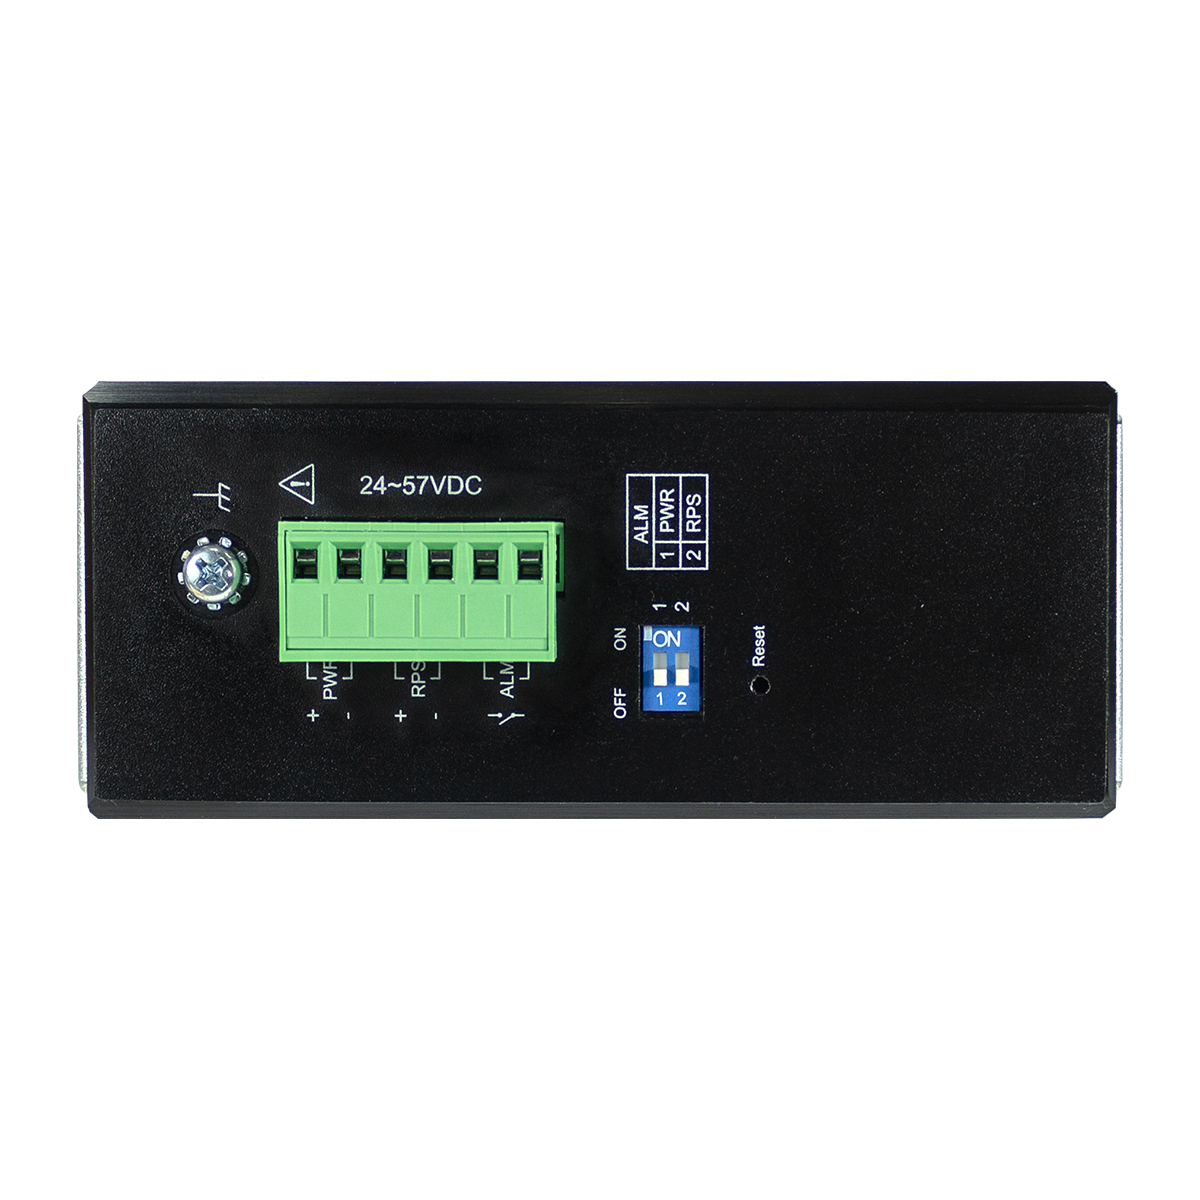 EDS-G308 Series:Unmanaged full Gigabit Ethernet switch with 8  10/100/1000BaseT(X) ports, MOXA Inc., Search by Company, Products